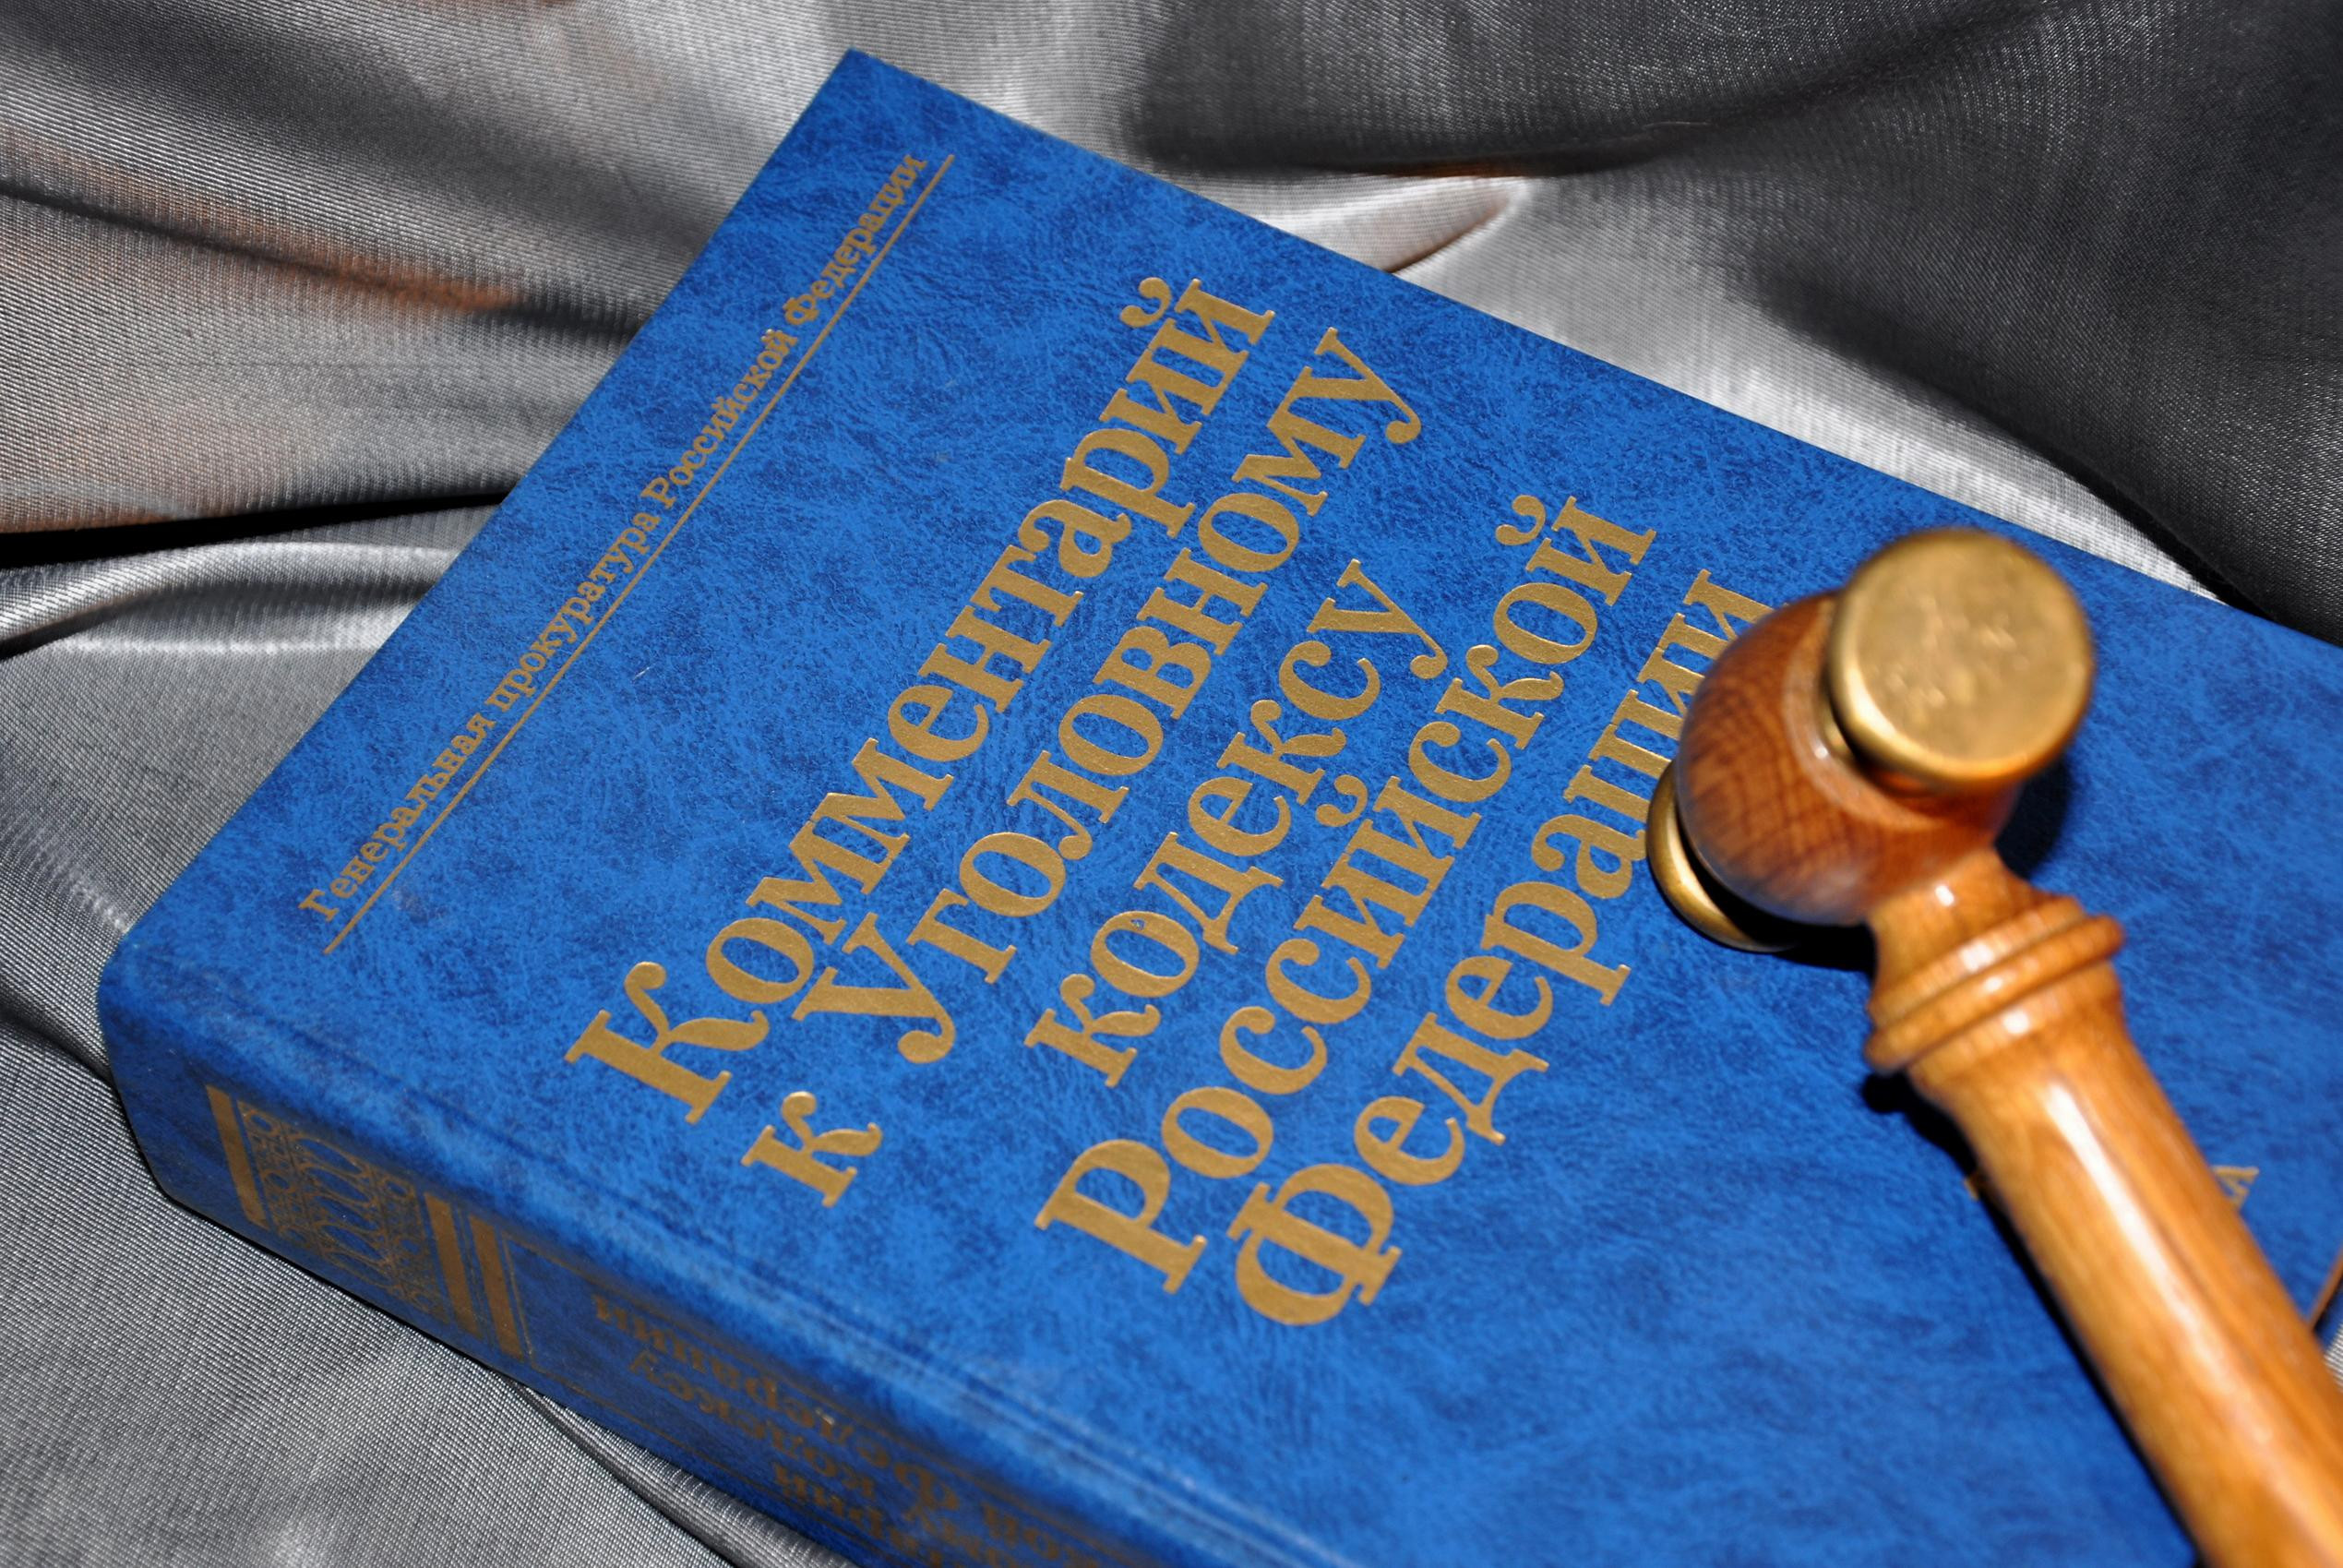 Draft Law on Amendments to Article 201 of the Criminal Code of the Russian Federation